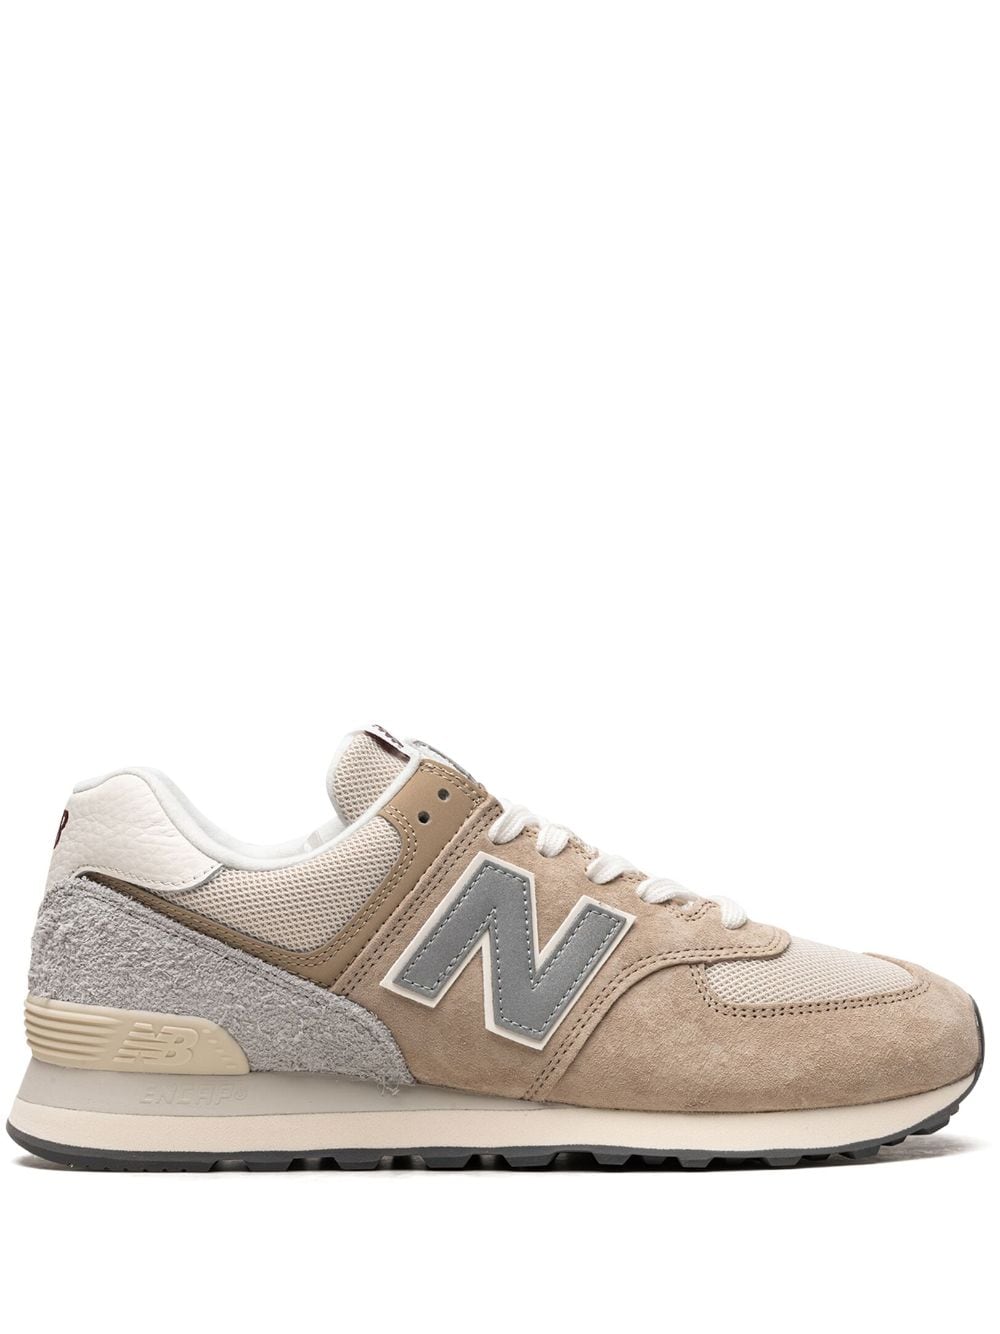 New Balance 574 "Lunar New Year - Mindful Grey" sneakers - Neutrals